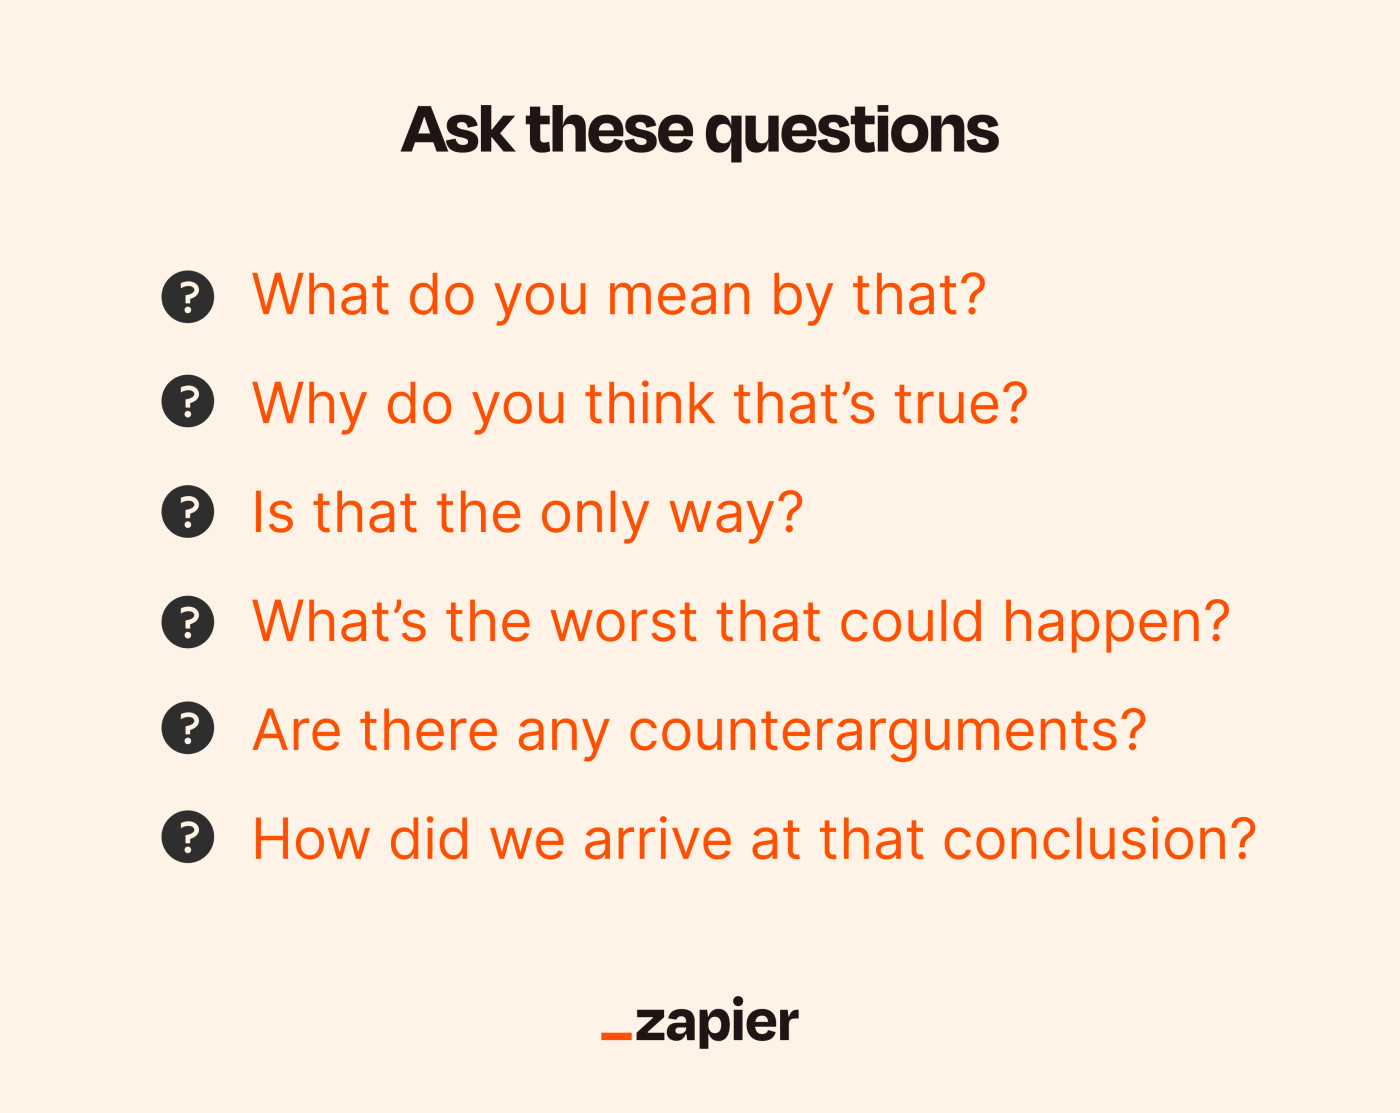 An infographic with Socratic-style questions to ask in a business setting